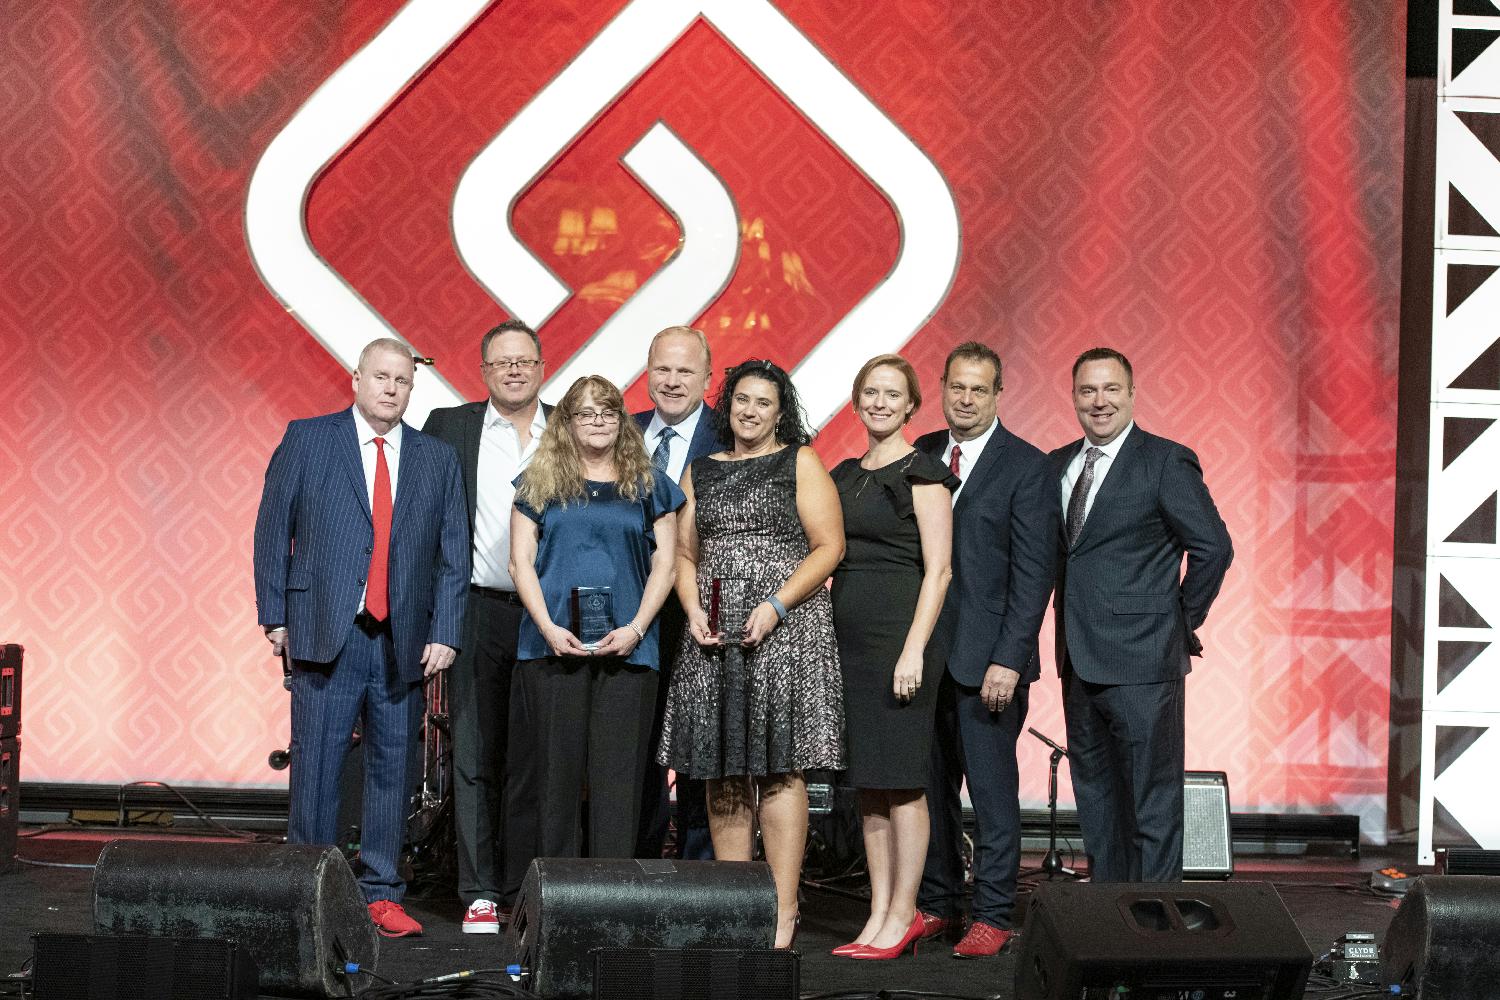 PRMI Executive Leadership Team recognizes two top employees for outstanding service at its 2019 National Conference.